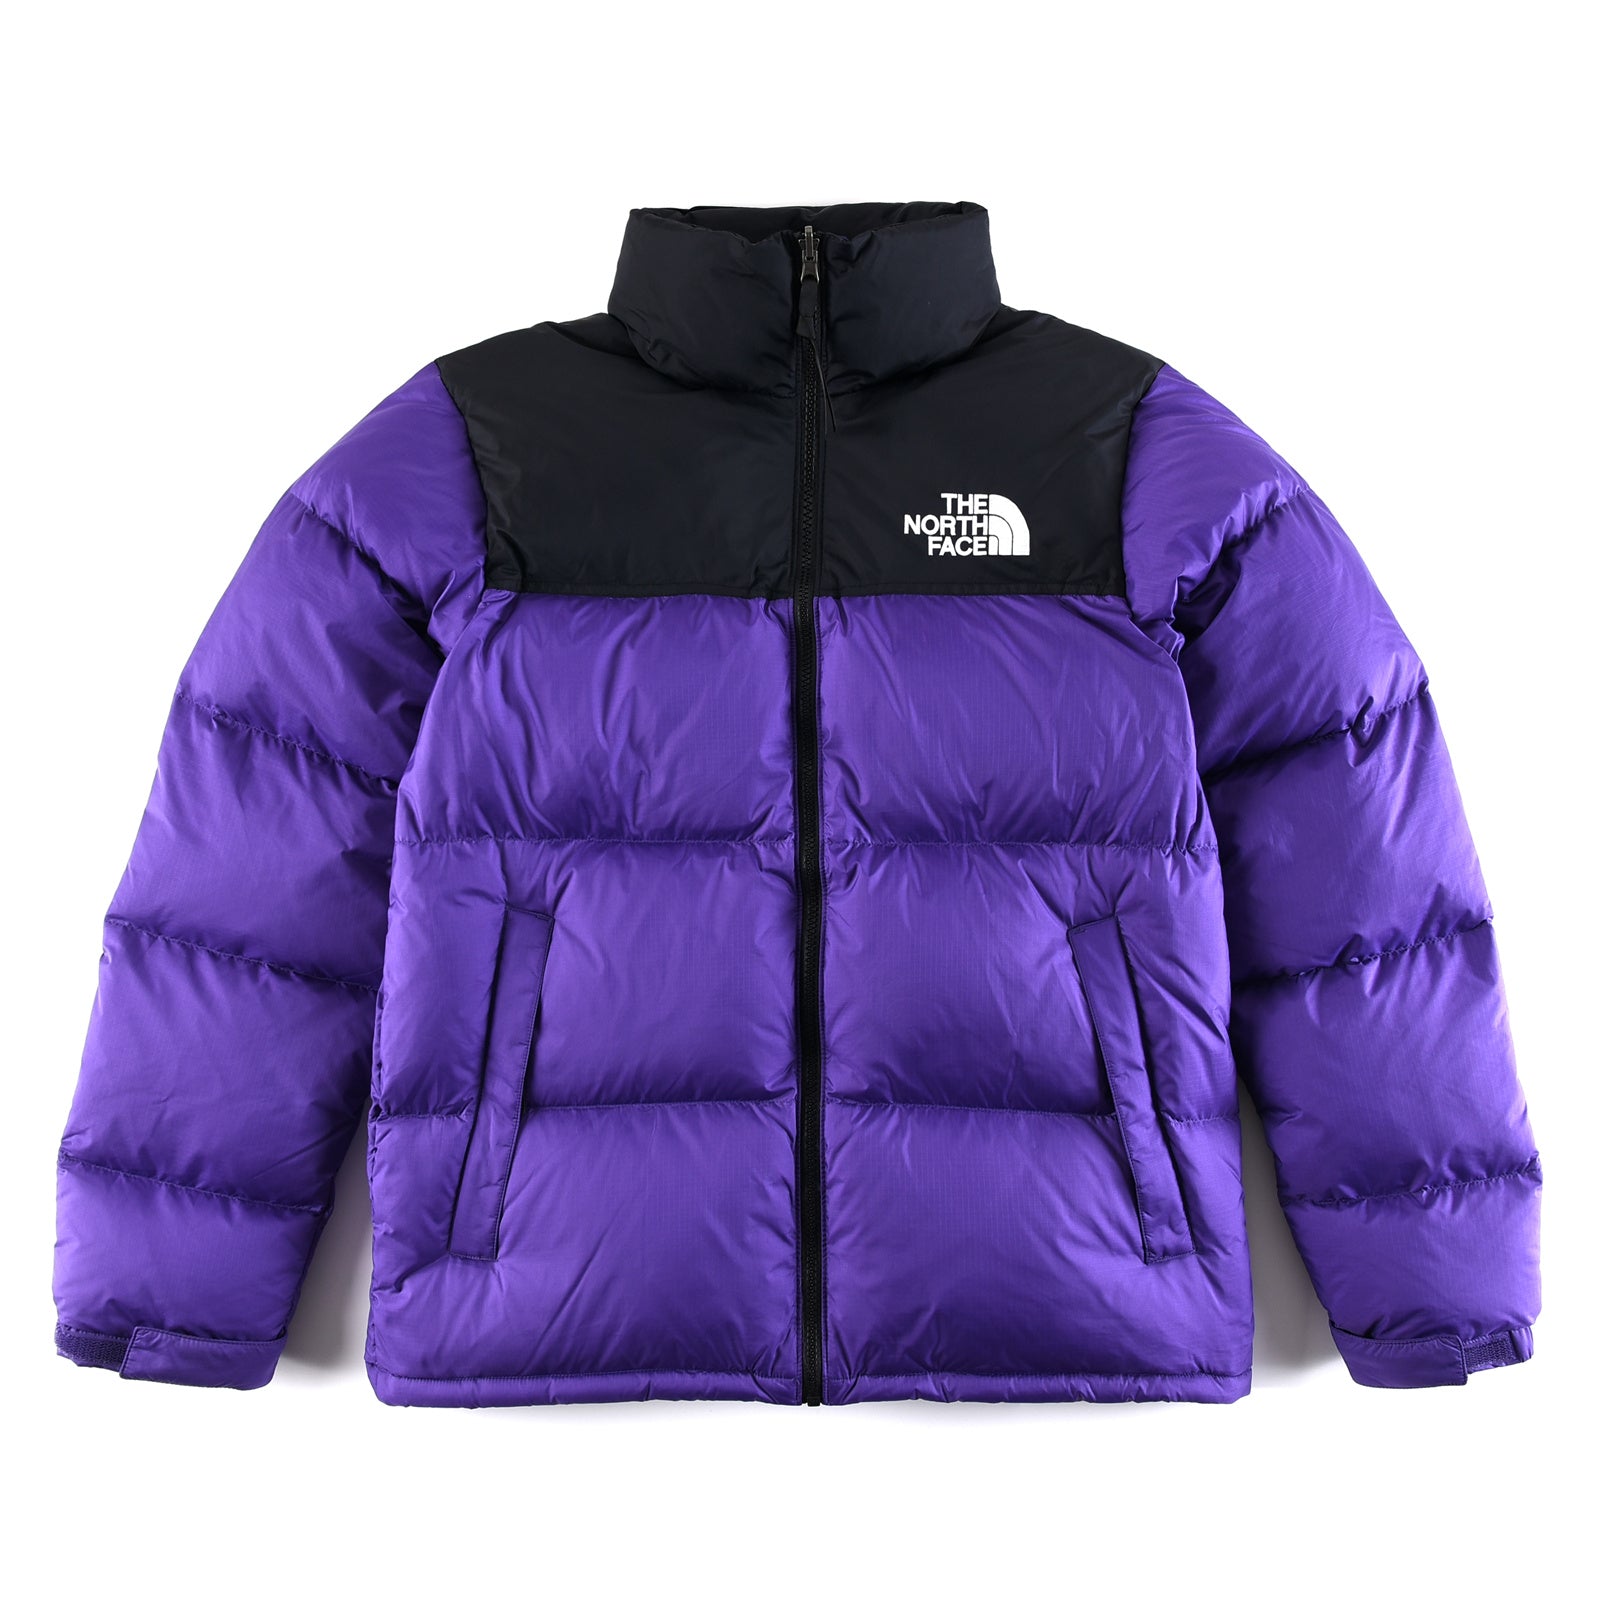 The North Face 1996 Retro Nuptse 700 Fill Packable Jacket 